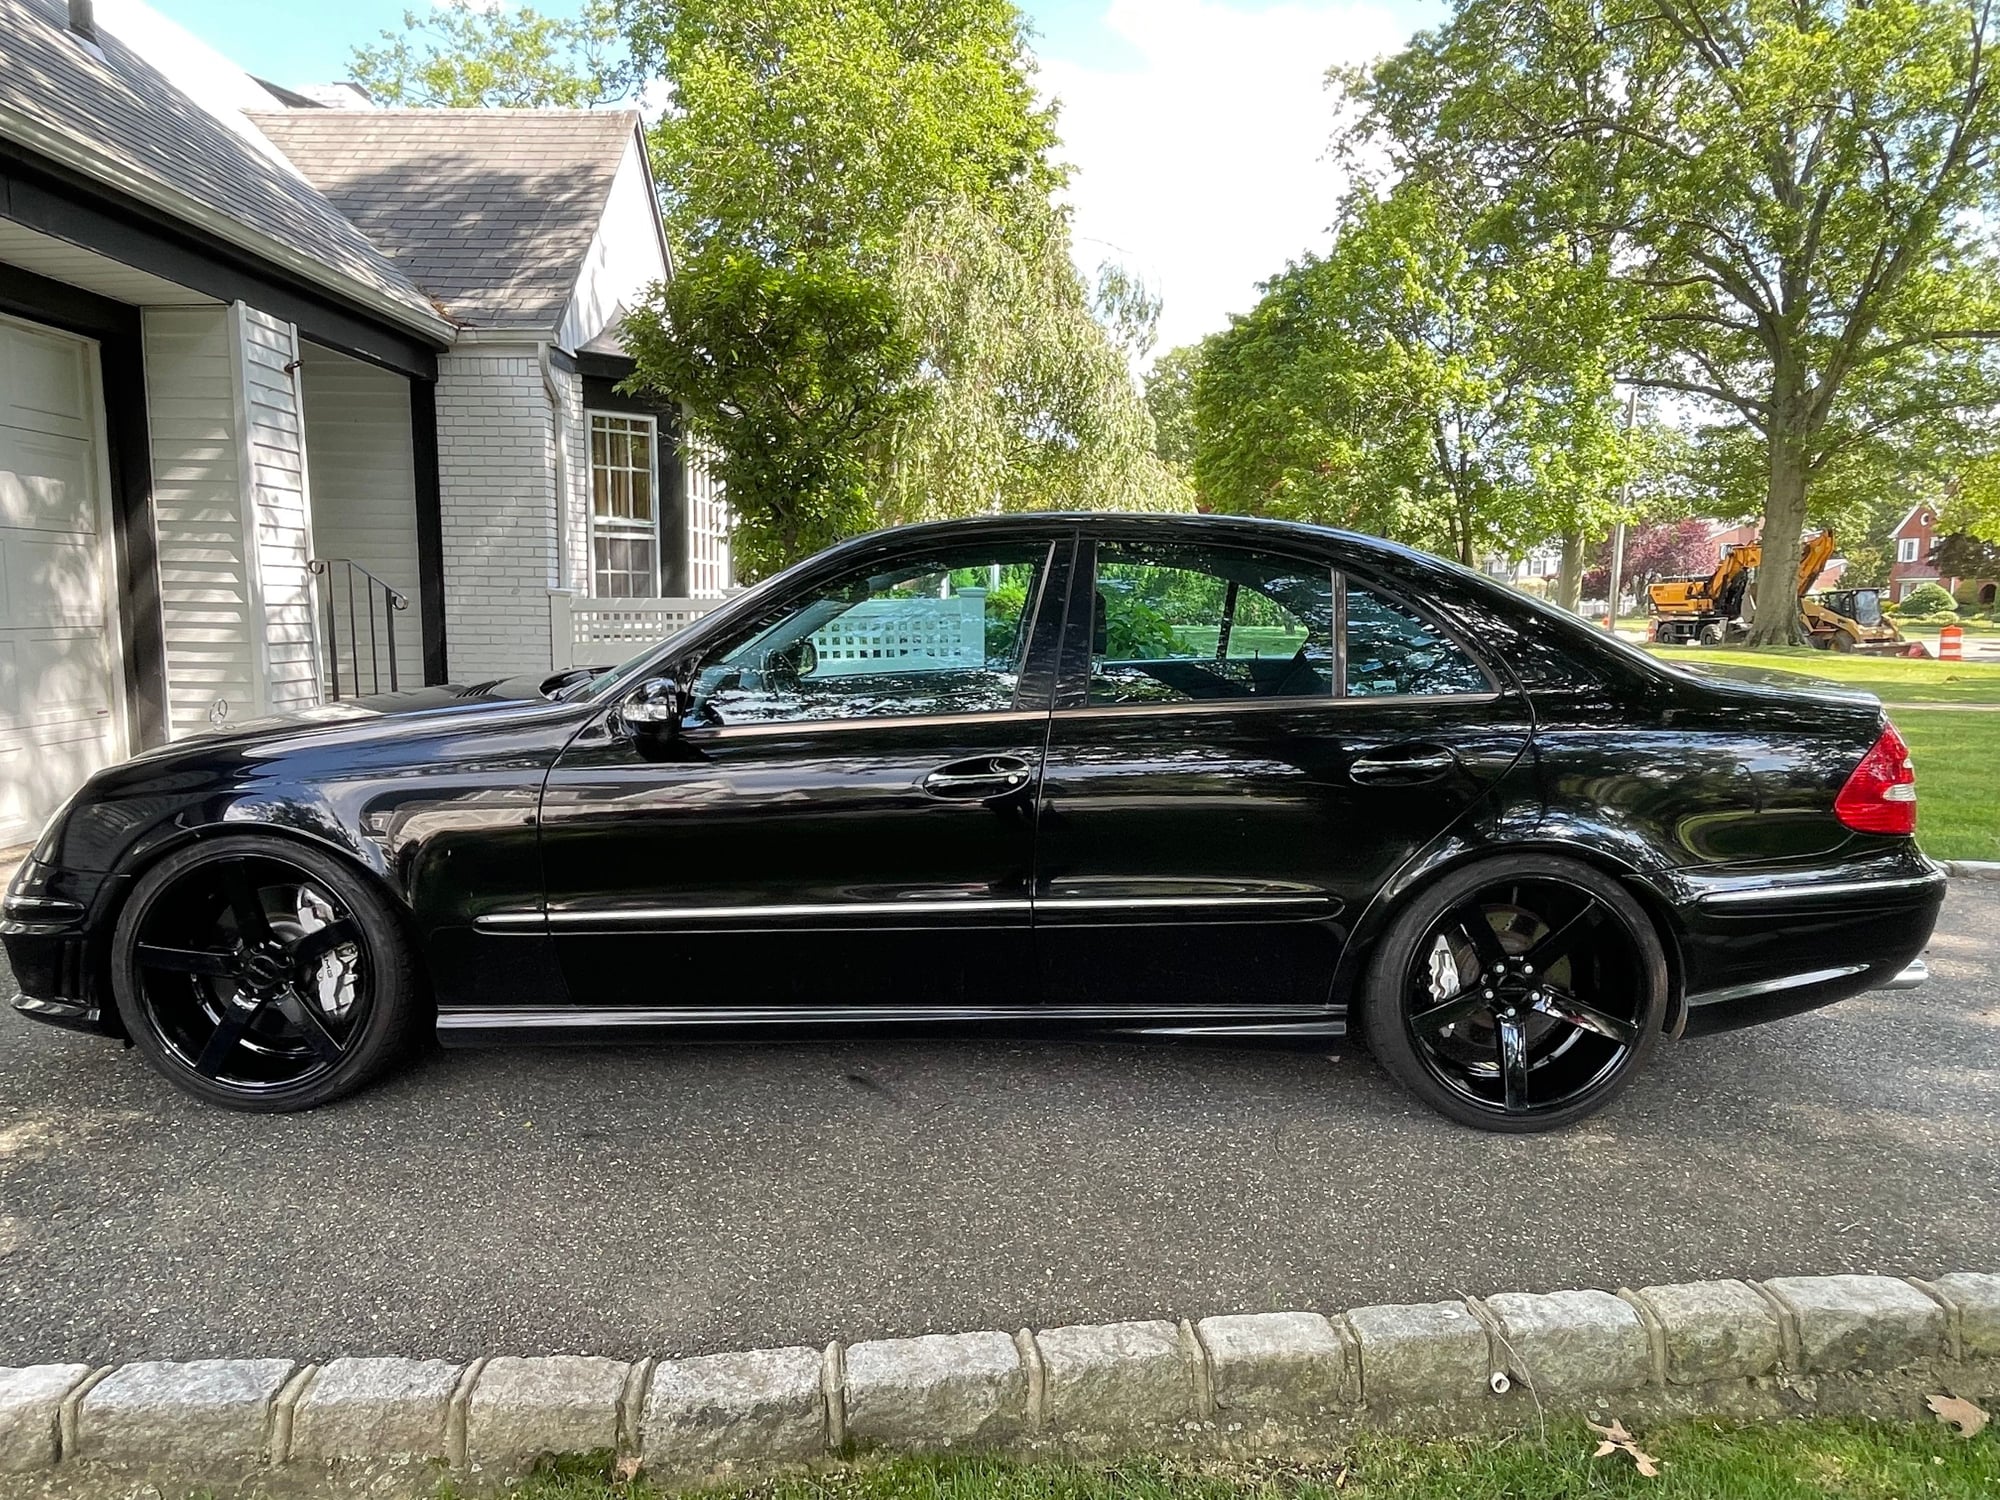 Wheels and Tires/Axles - Vossen CV3R 20" Wheels - Black E55 - Used - 2003 to 2006 Mercedes-Benz E55 AMG - Franklin Square, NY 11010, United States